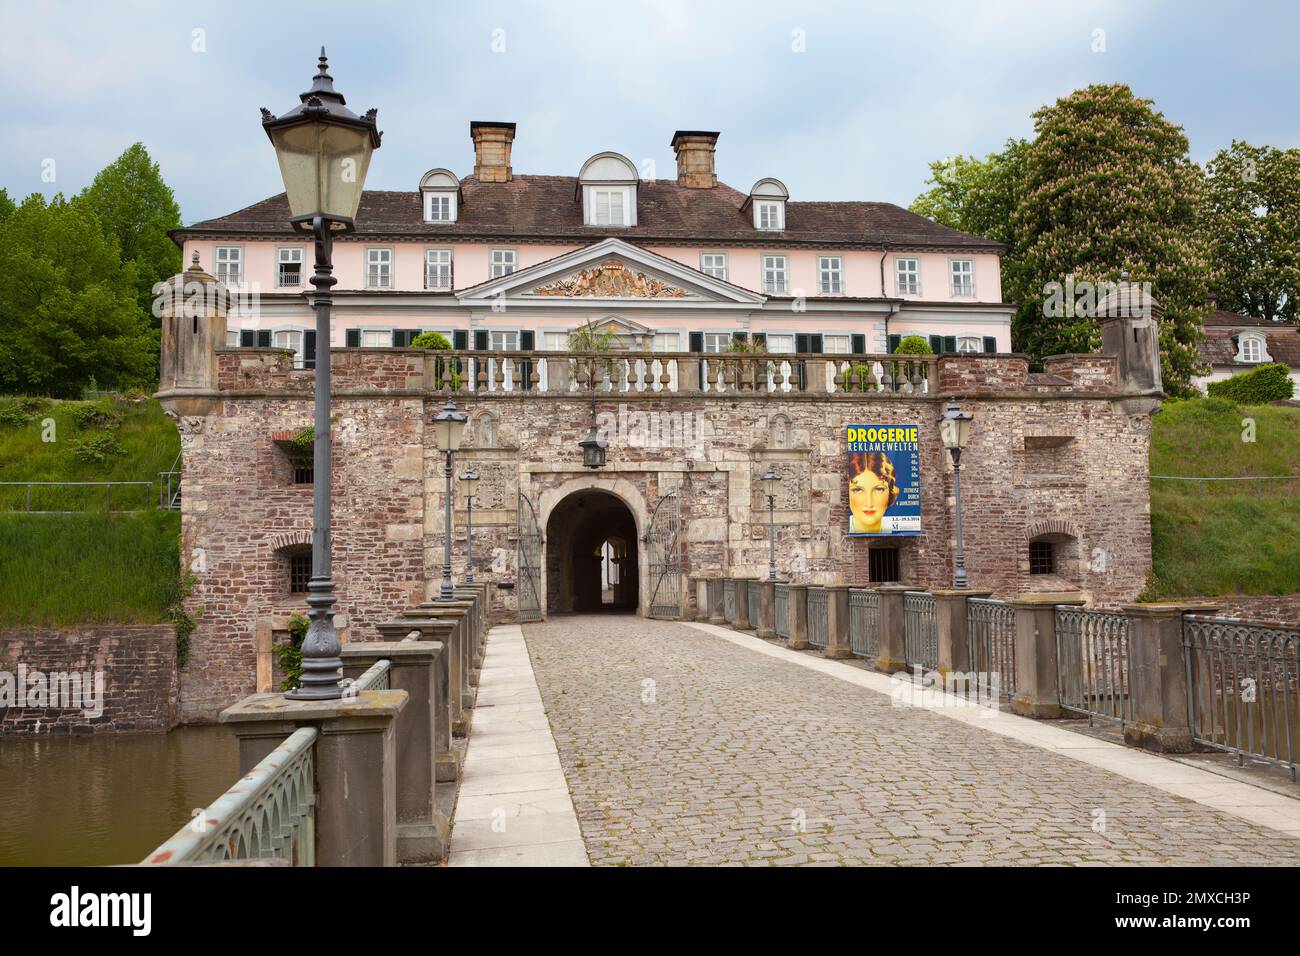 The Baroque castle, Bad Pyrmont, district of Hamelin-Pyrmont, Lower Saxony, Germany Stock Photo